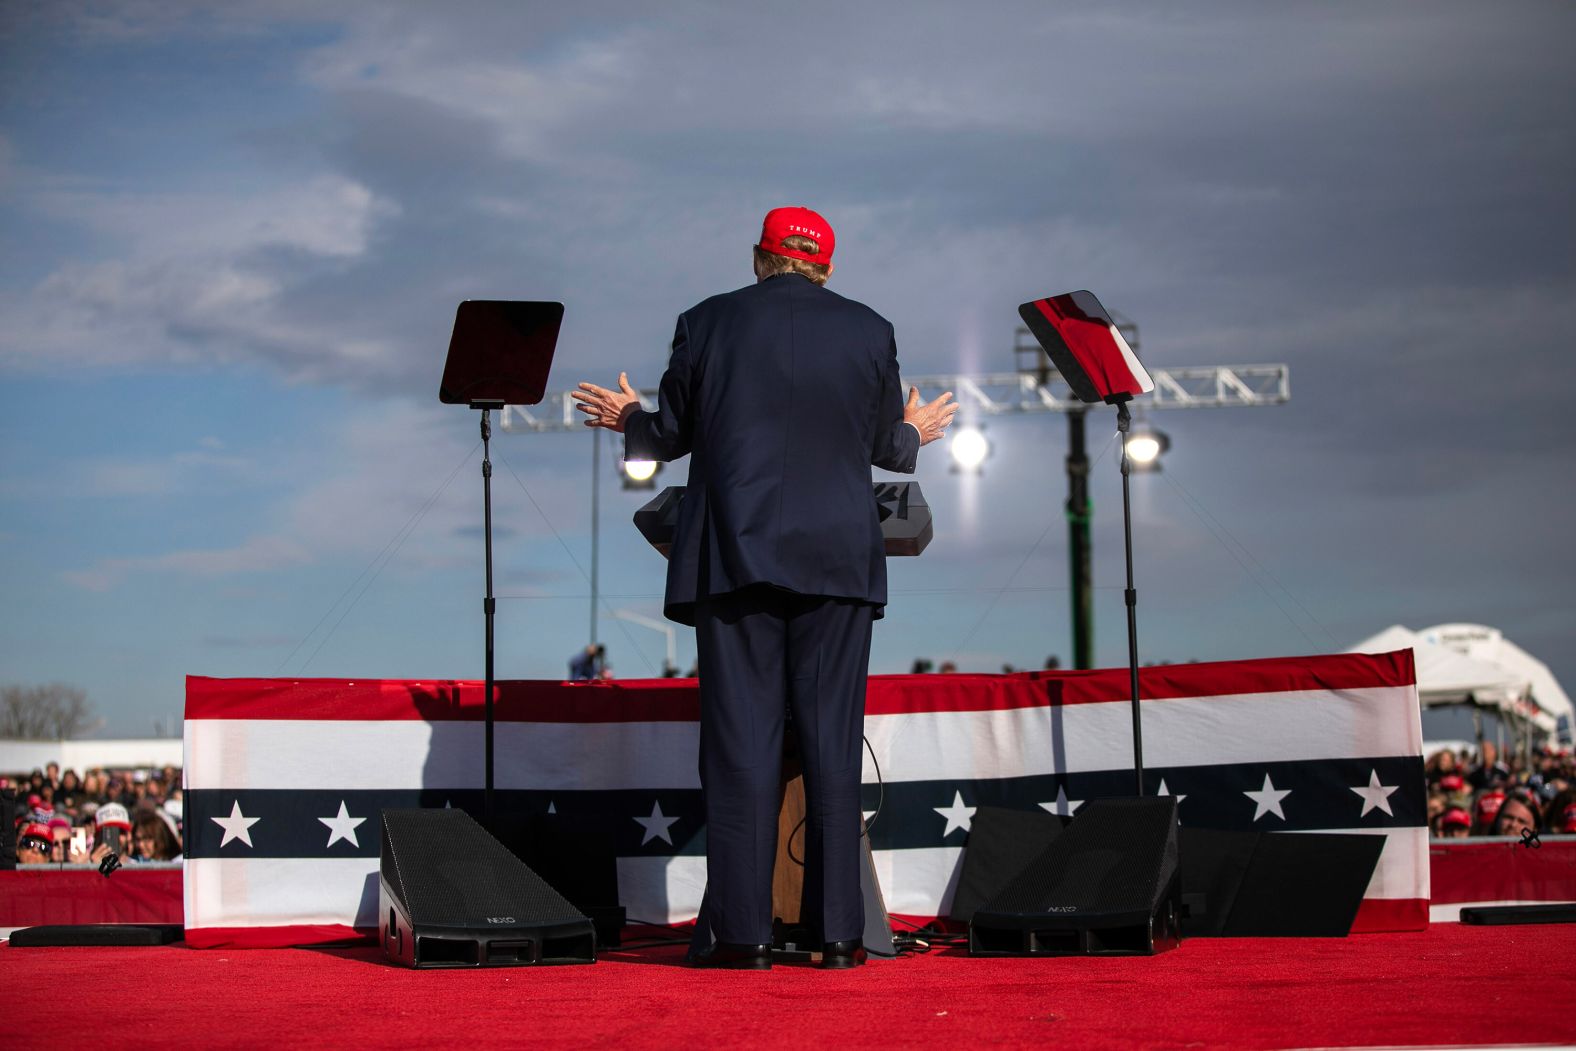 Former President Donald Trump speaks during a rally in Dayton, Ohio, on Saturday, March 16. Trump warned that if he were to lose the 2024 election,<a href="index.php?page=&url=https%3A%2F%2Fwww.cnn.com%2F2024%2F03%2F16%2Fpolitics%2Ftrump-bloodbath-auto-industry-election%2Findex.html" target="_blank"> it would be a "bloodbath"</a> for the US auto industry and the country. The remark came as Trump promised a "100% tariff" on cars made outside the US, arguing that domestic auto manufacturing would be protected only if he is elected.